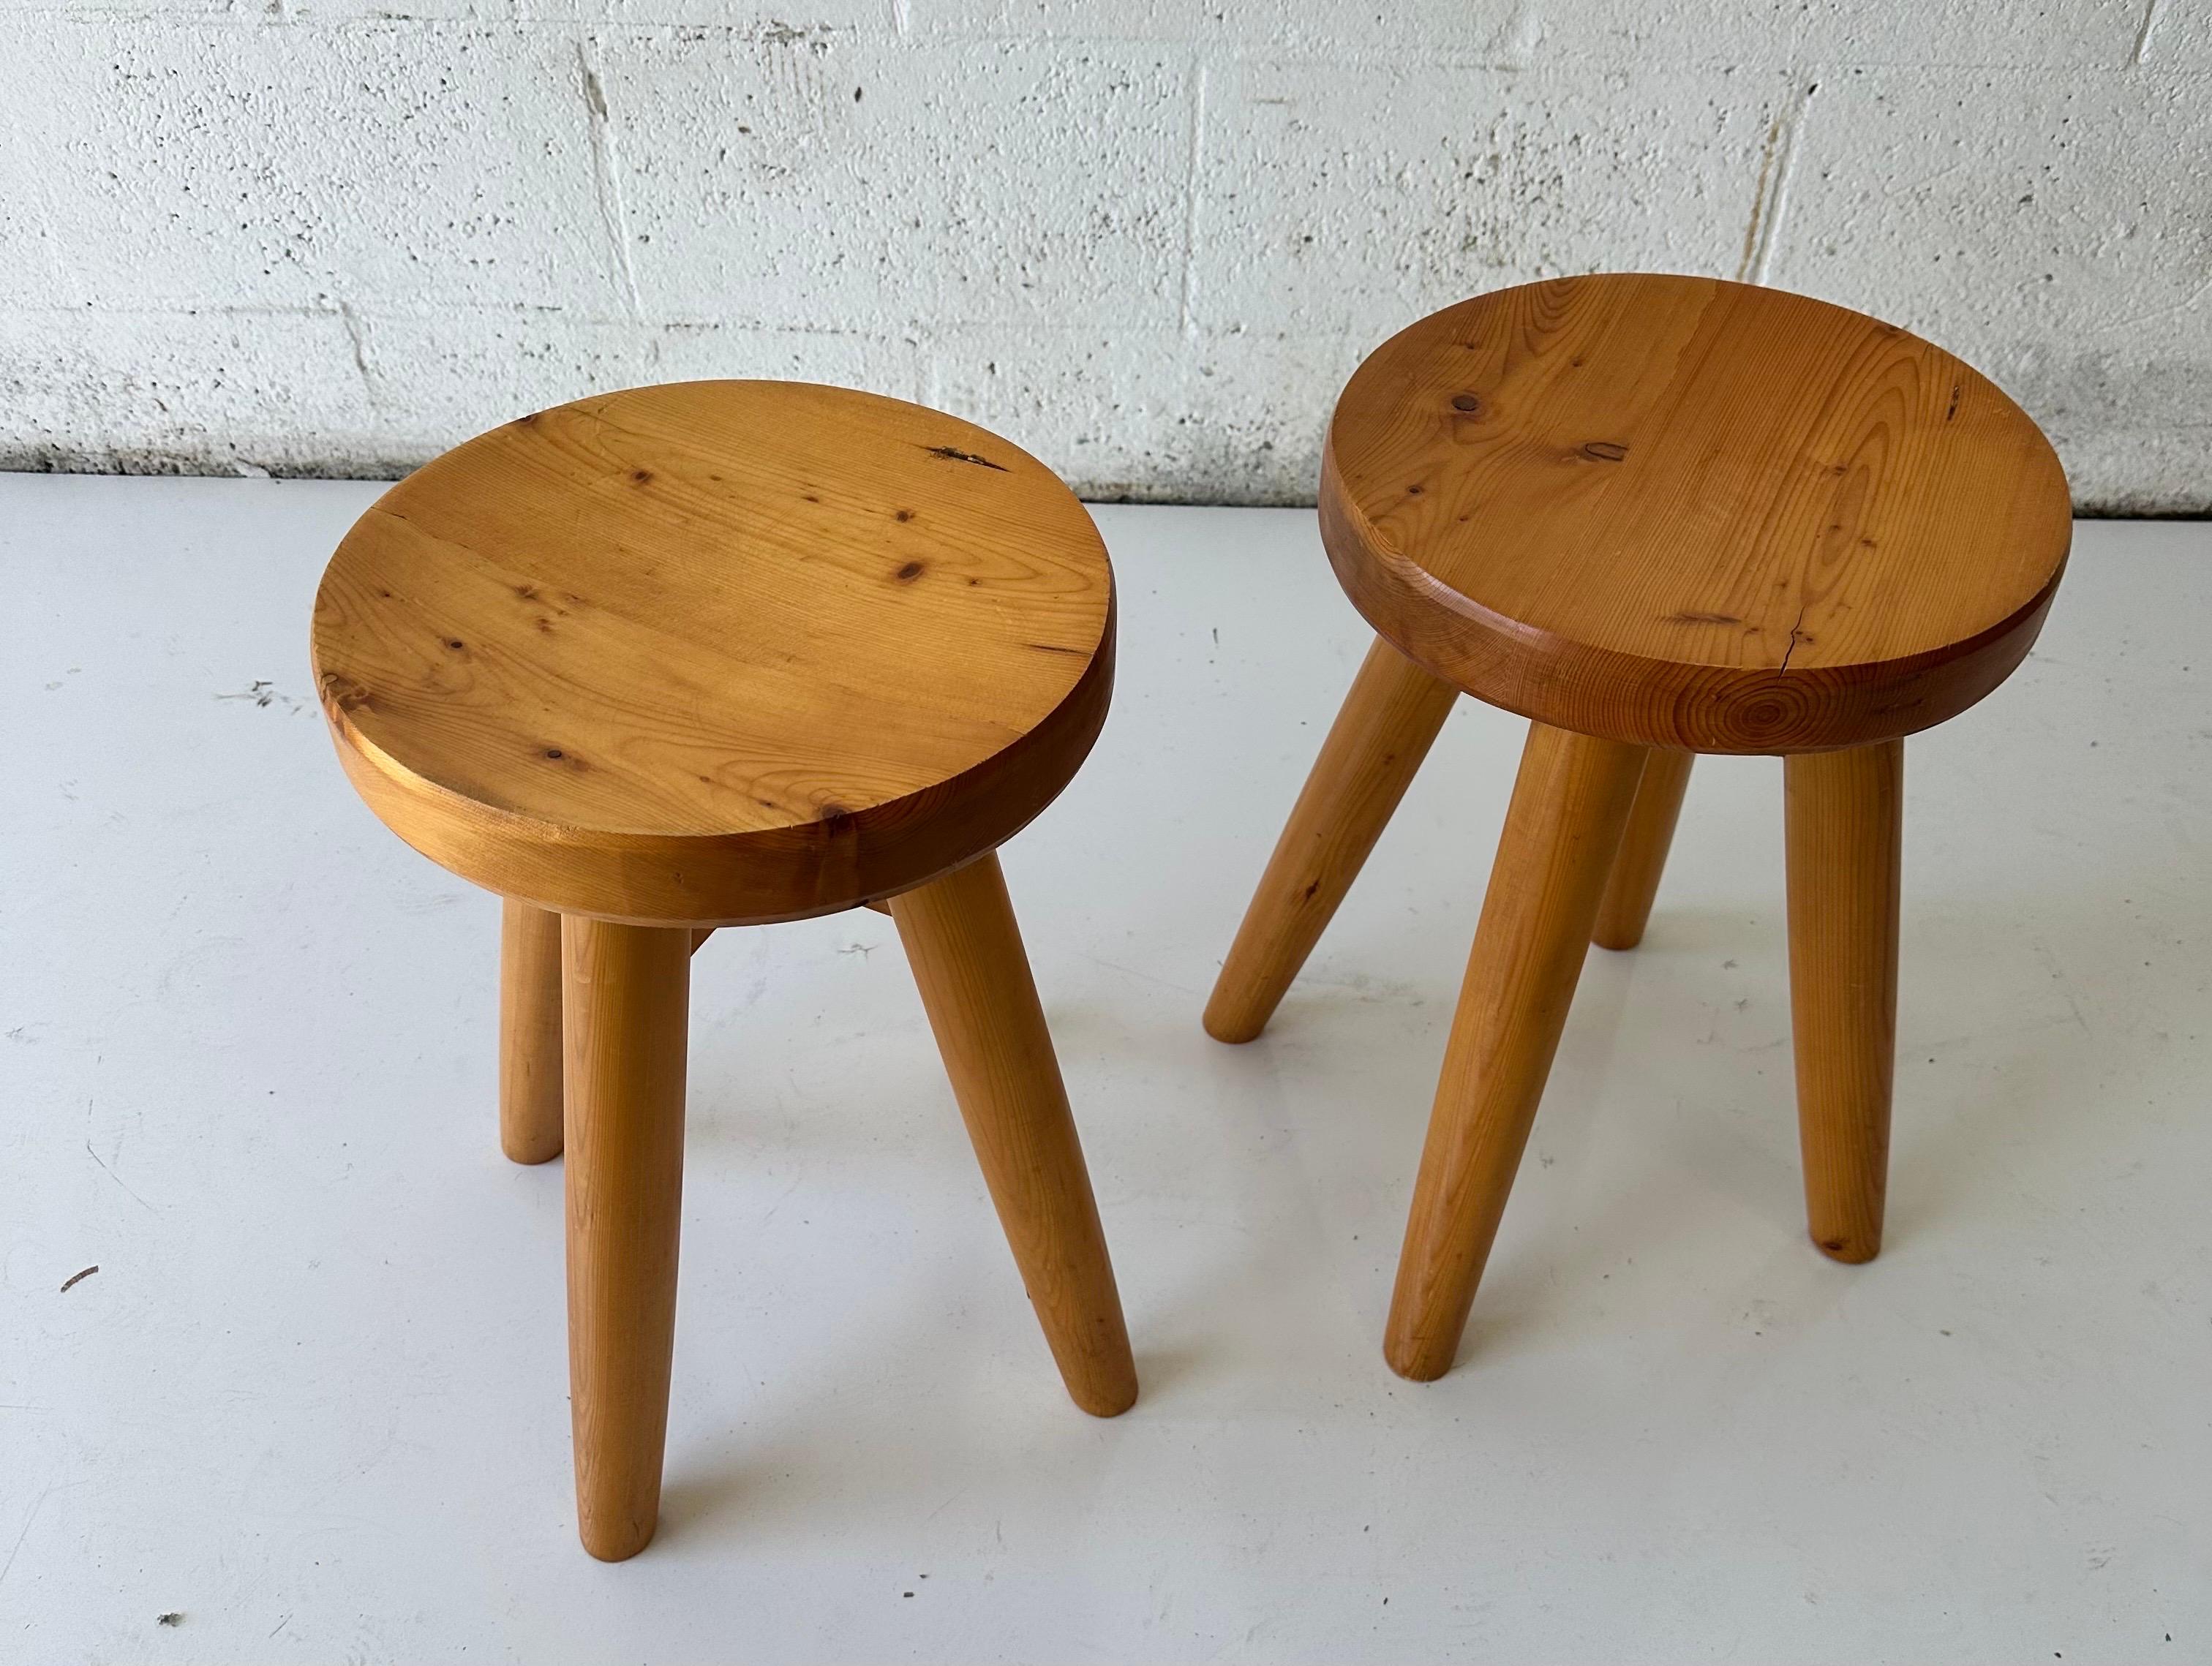 Pair of pine Stools made by Rene Martin Alias “ Rene Les ciseaux “.
He was the Charlotte Perriand Ebenist for “ Les  Arcs “ the French Alps ski resort.
Provenance: residence Les Dryades.